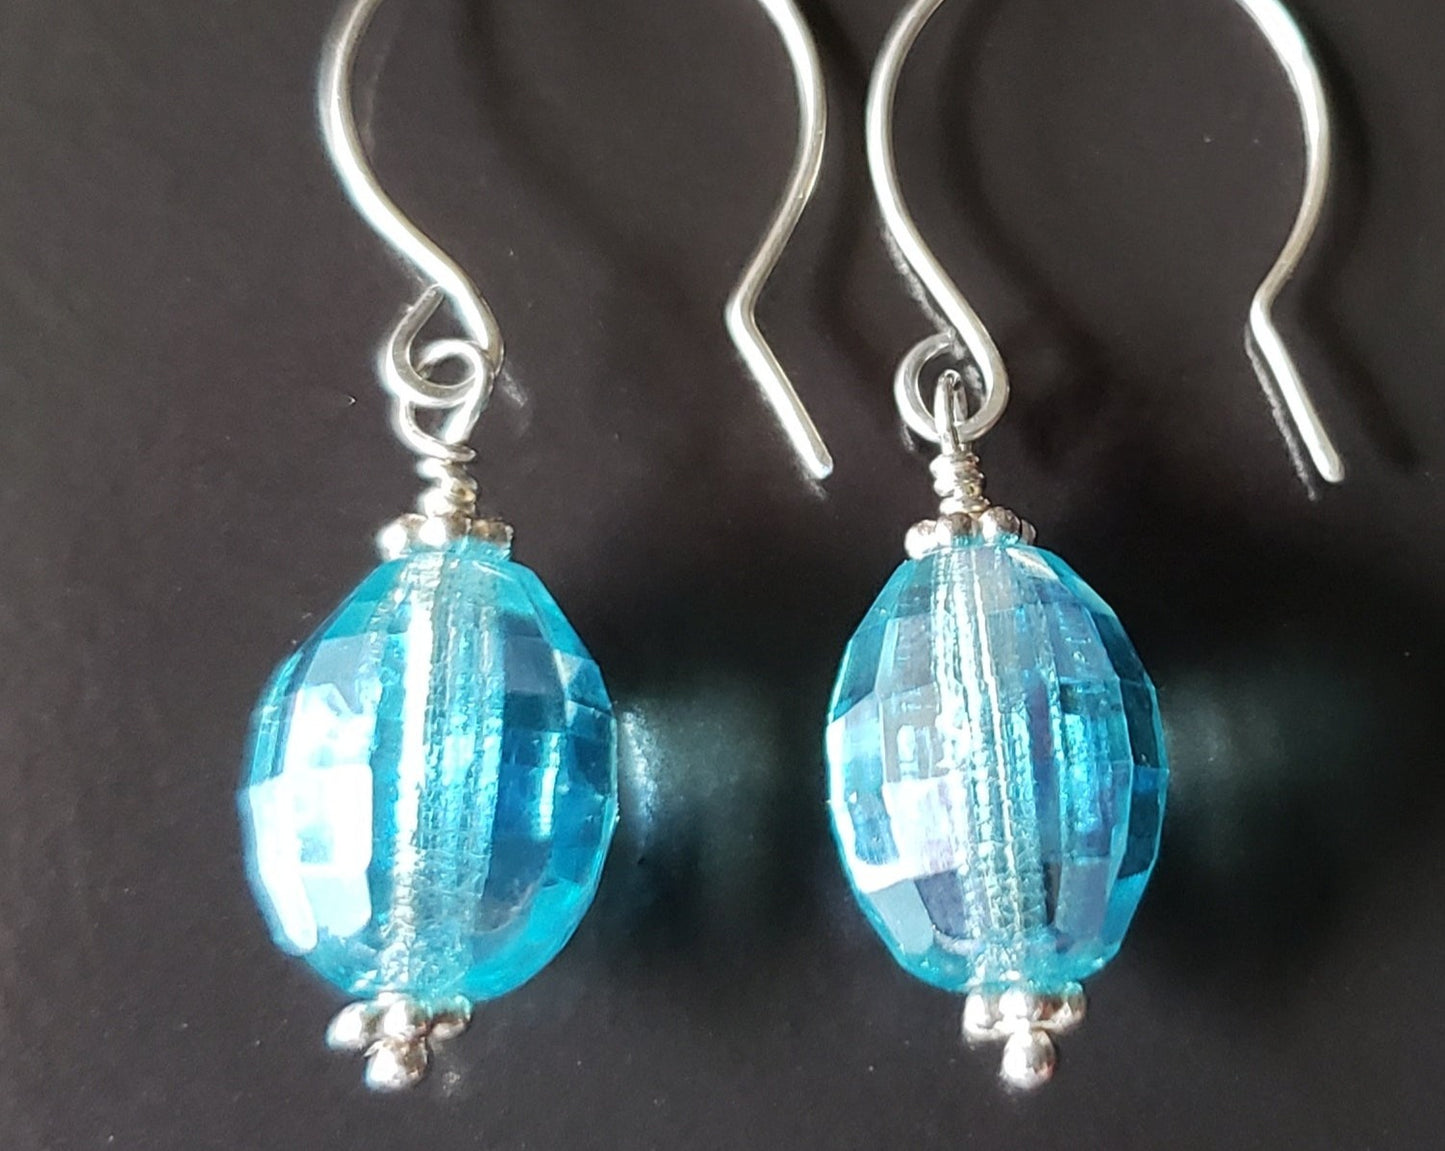 Brilliant Aqua Blue Crystal Drop Earrings made with solid Sterling Silver and sparkly oval shaped faceted aqua blue Vintage Crystal